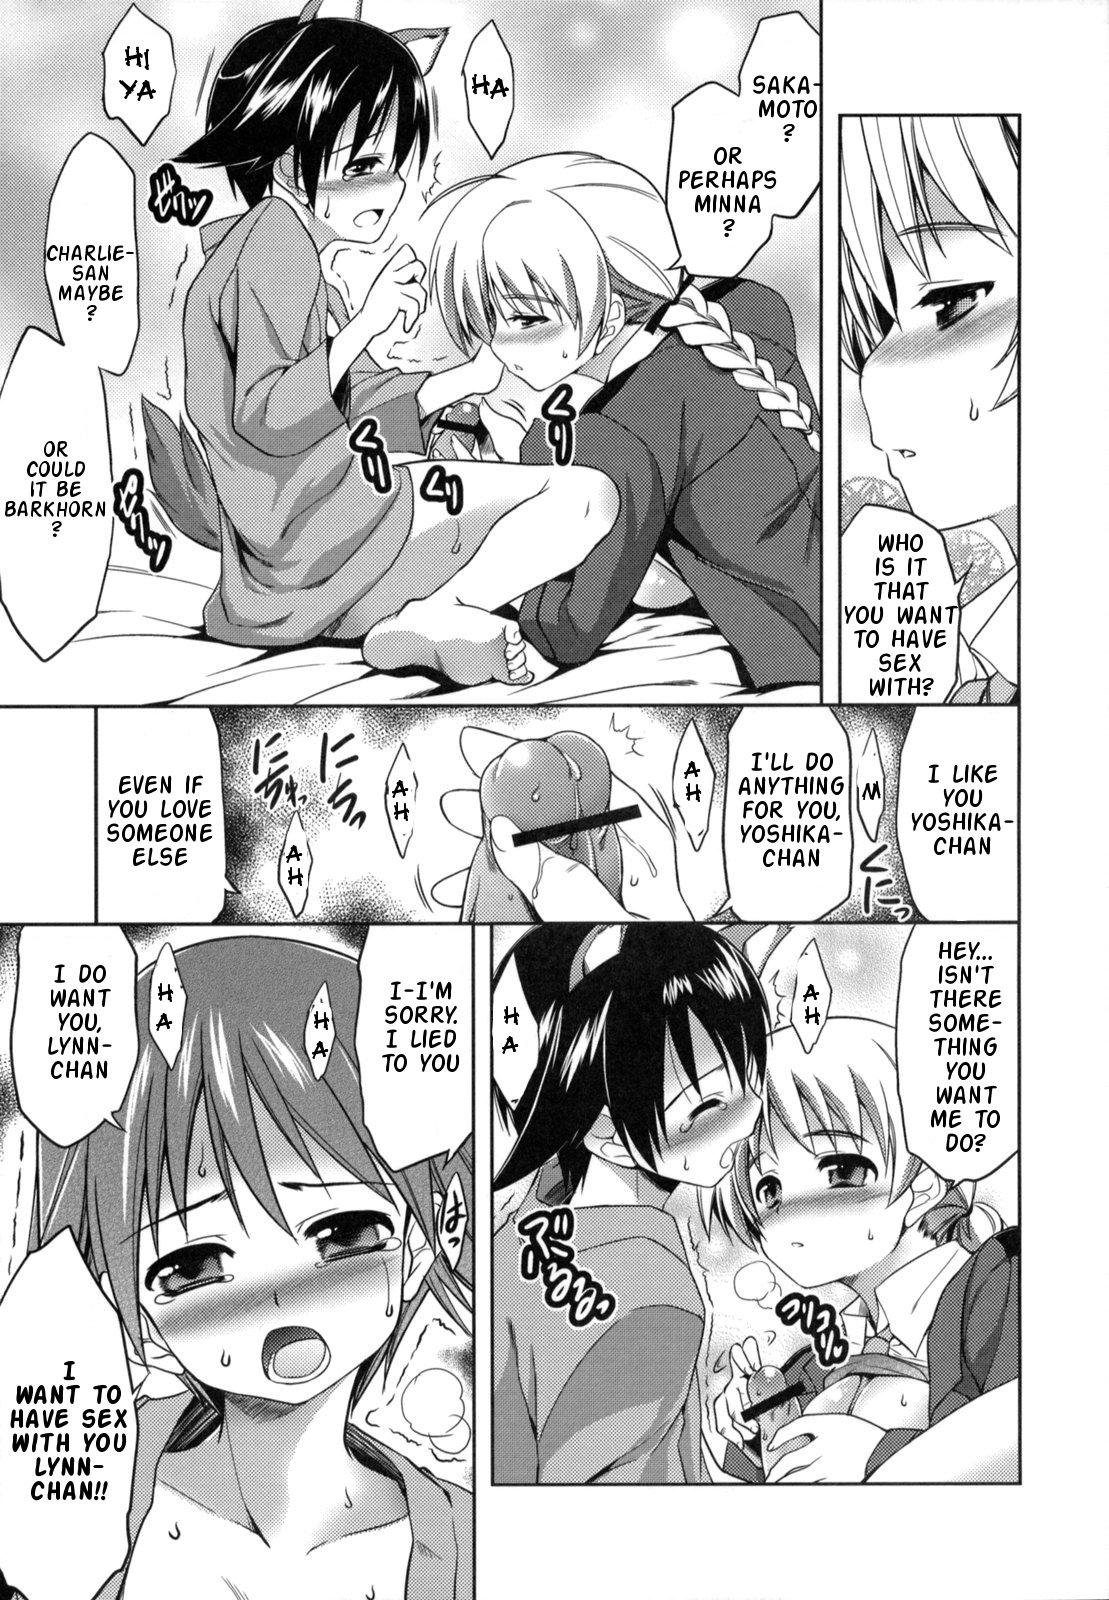 Loira GL WITCHES - Strike witches Girlfriend - Page 6